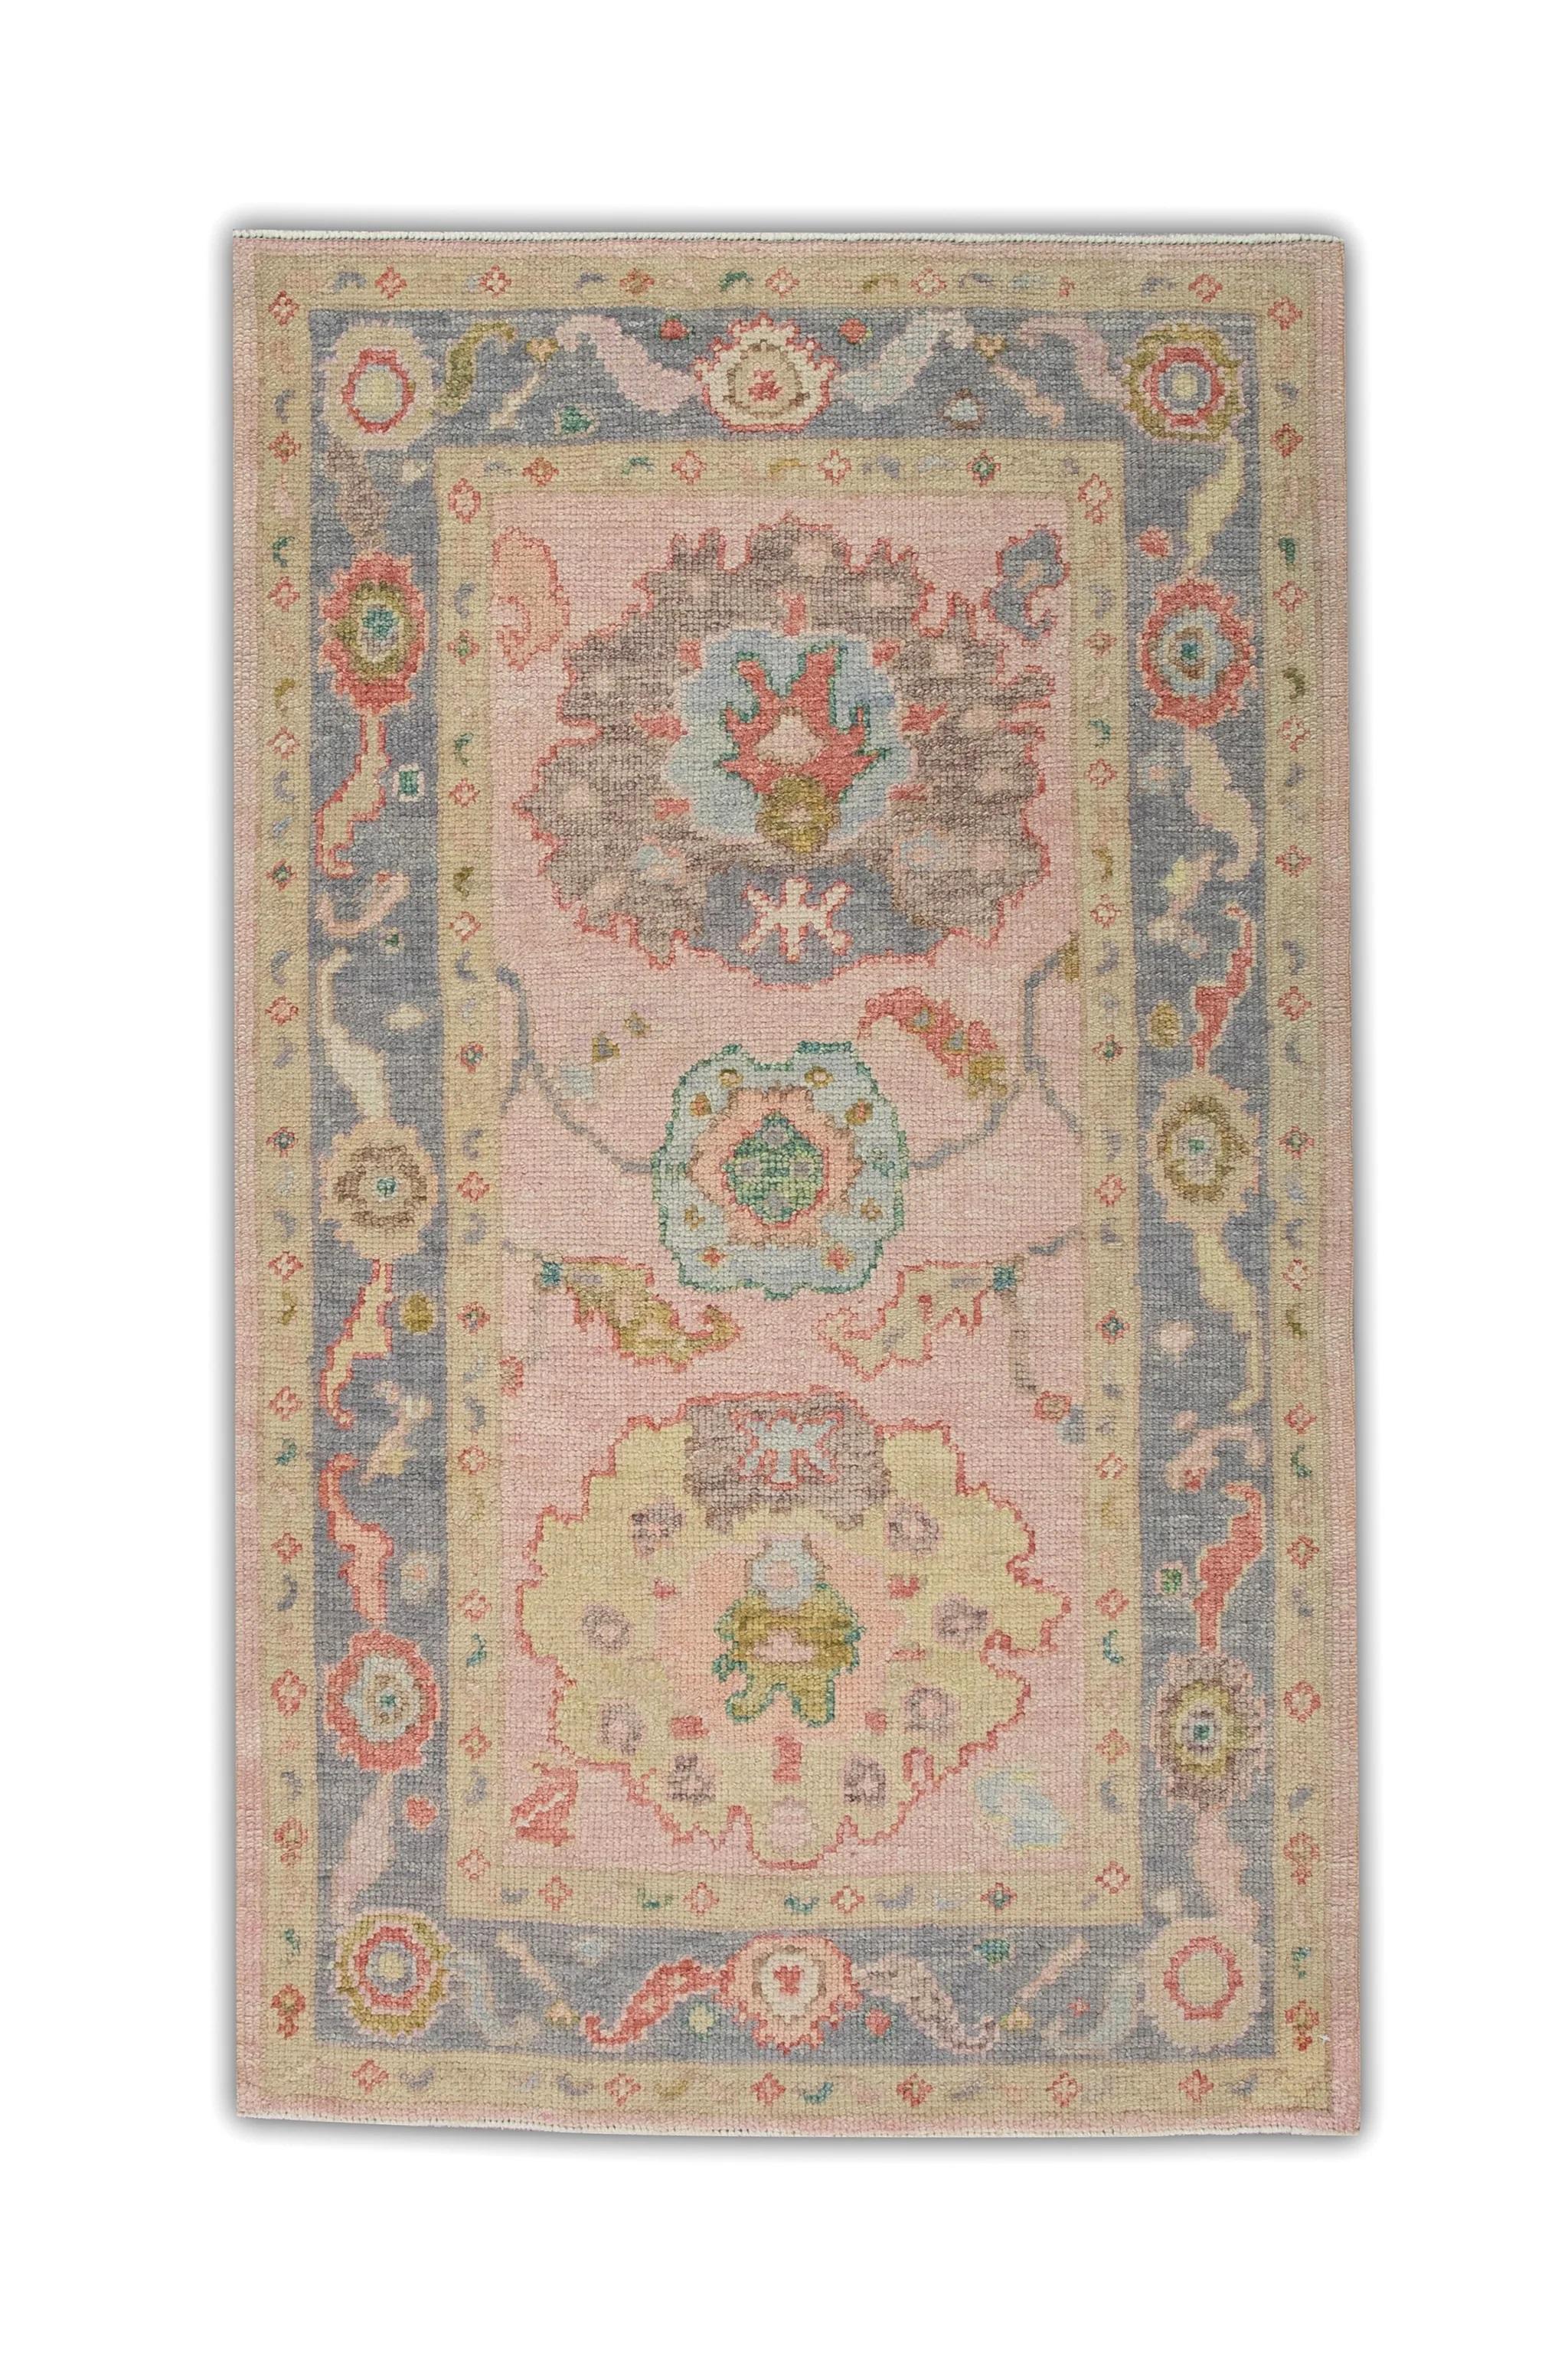 Soft Pink Handwoven Wool Turkish Oushak Rug in Floral Pattern 3' x 4'10